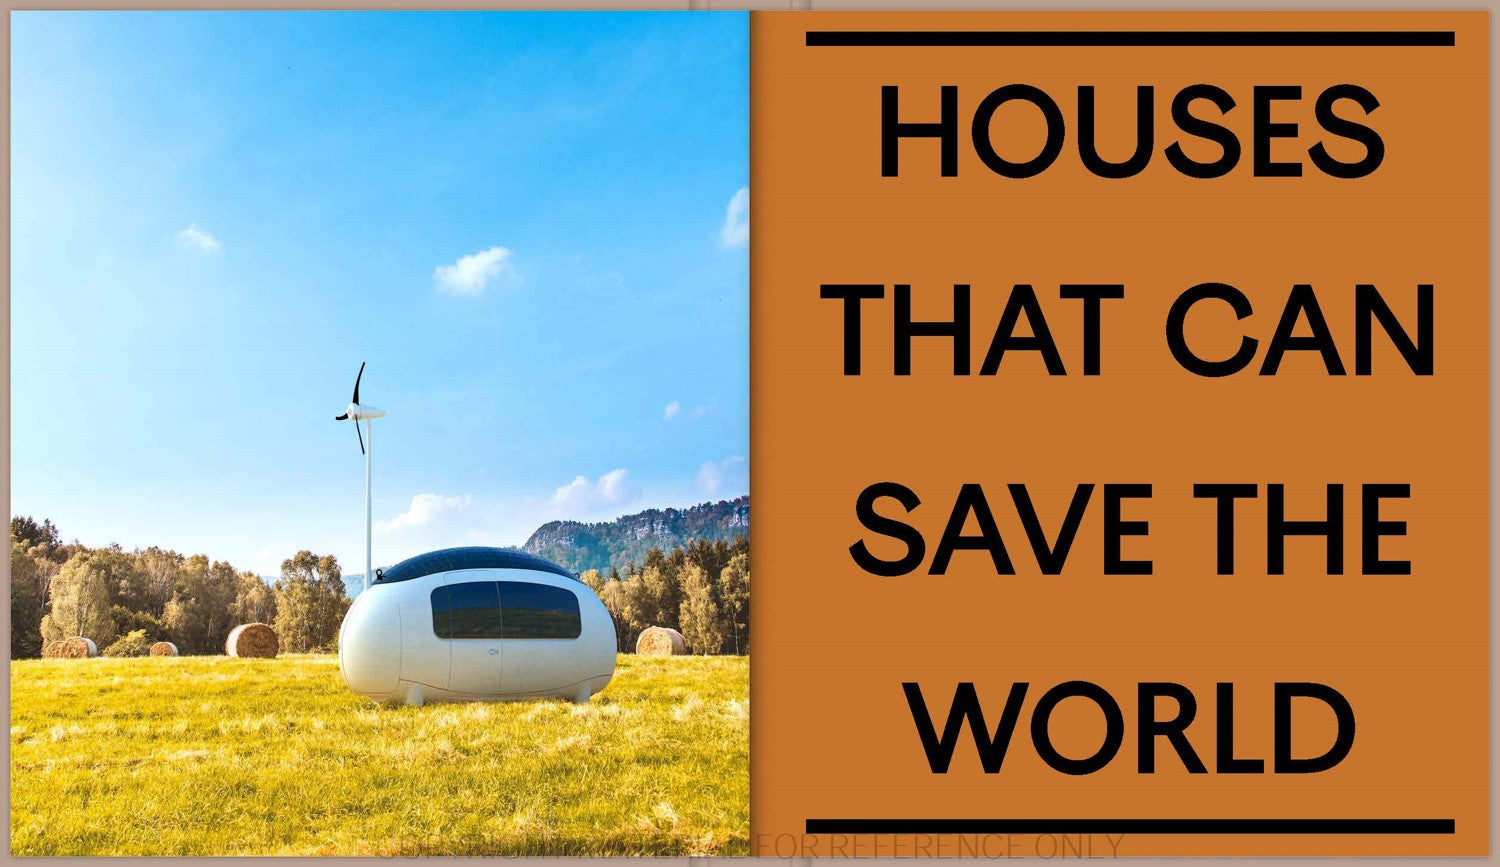 Houses That Can Save the World